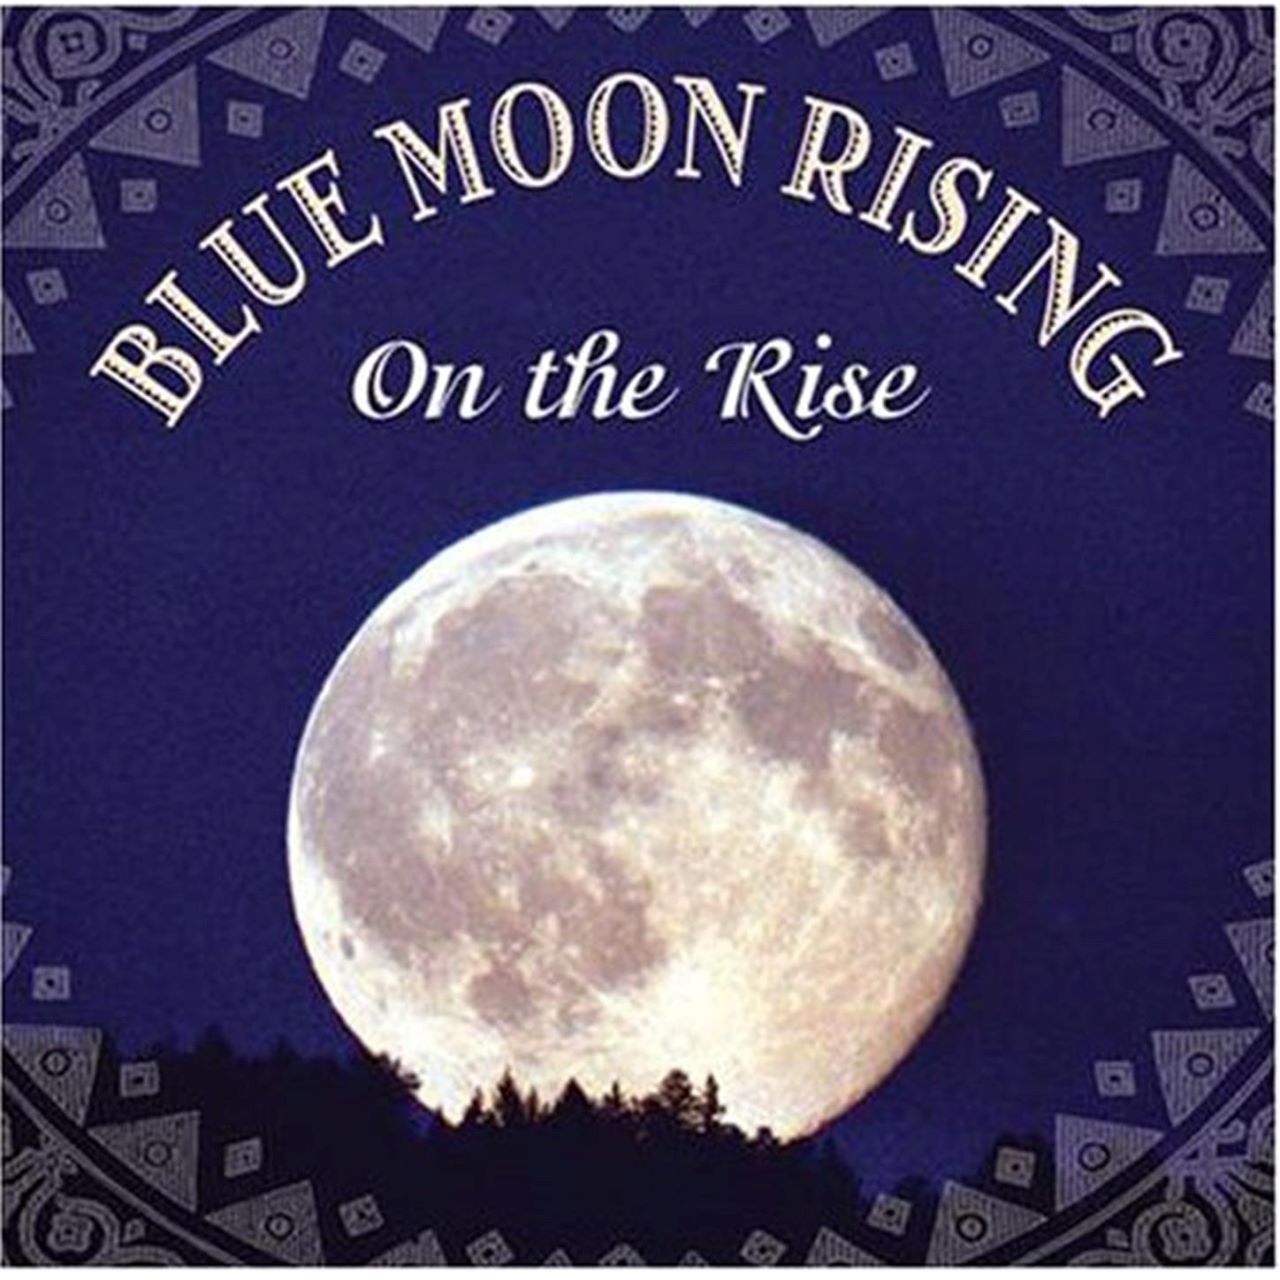 Blue Moon Rising - On The Rise cover album